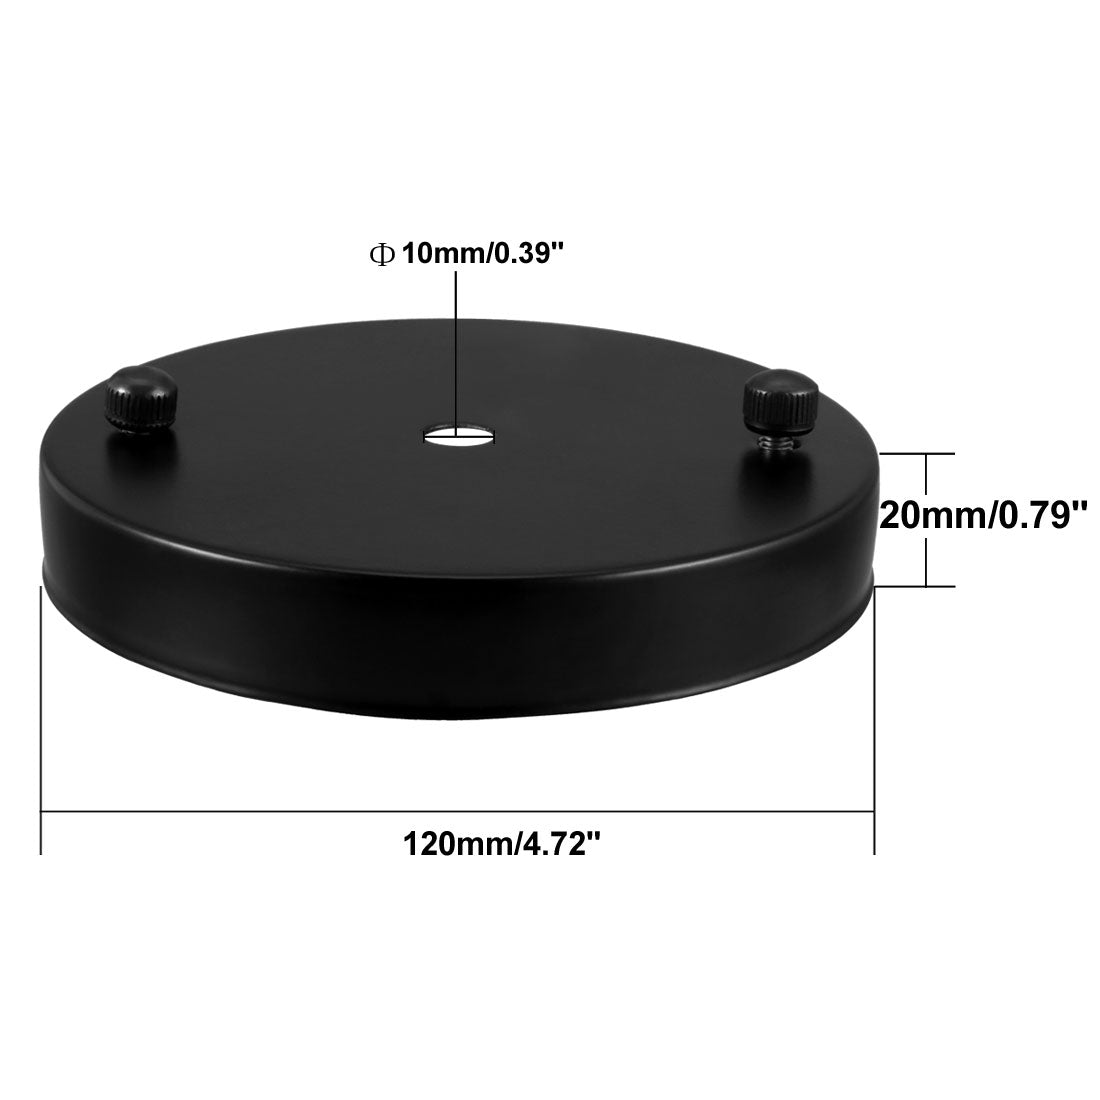 uxcell Uxcell Retro Ceiling Light Plate Pointed Base Chassis Disc Pendant Accessories 120mmx20mm Black w Screw